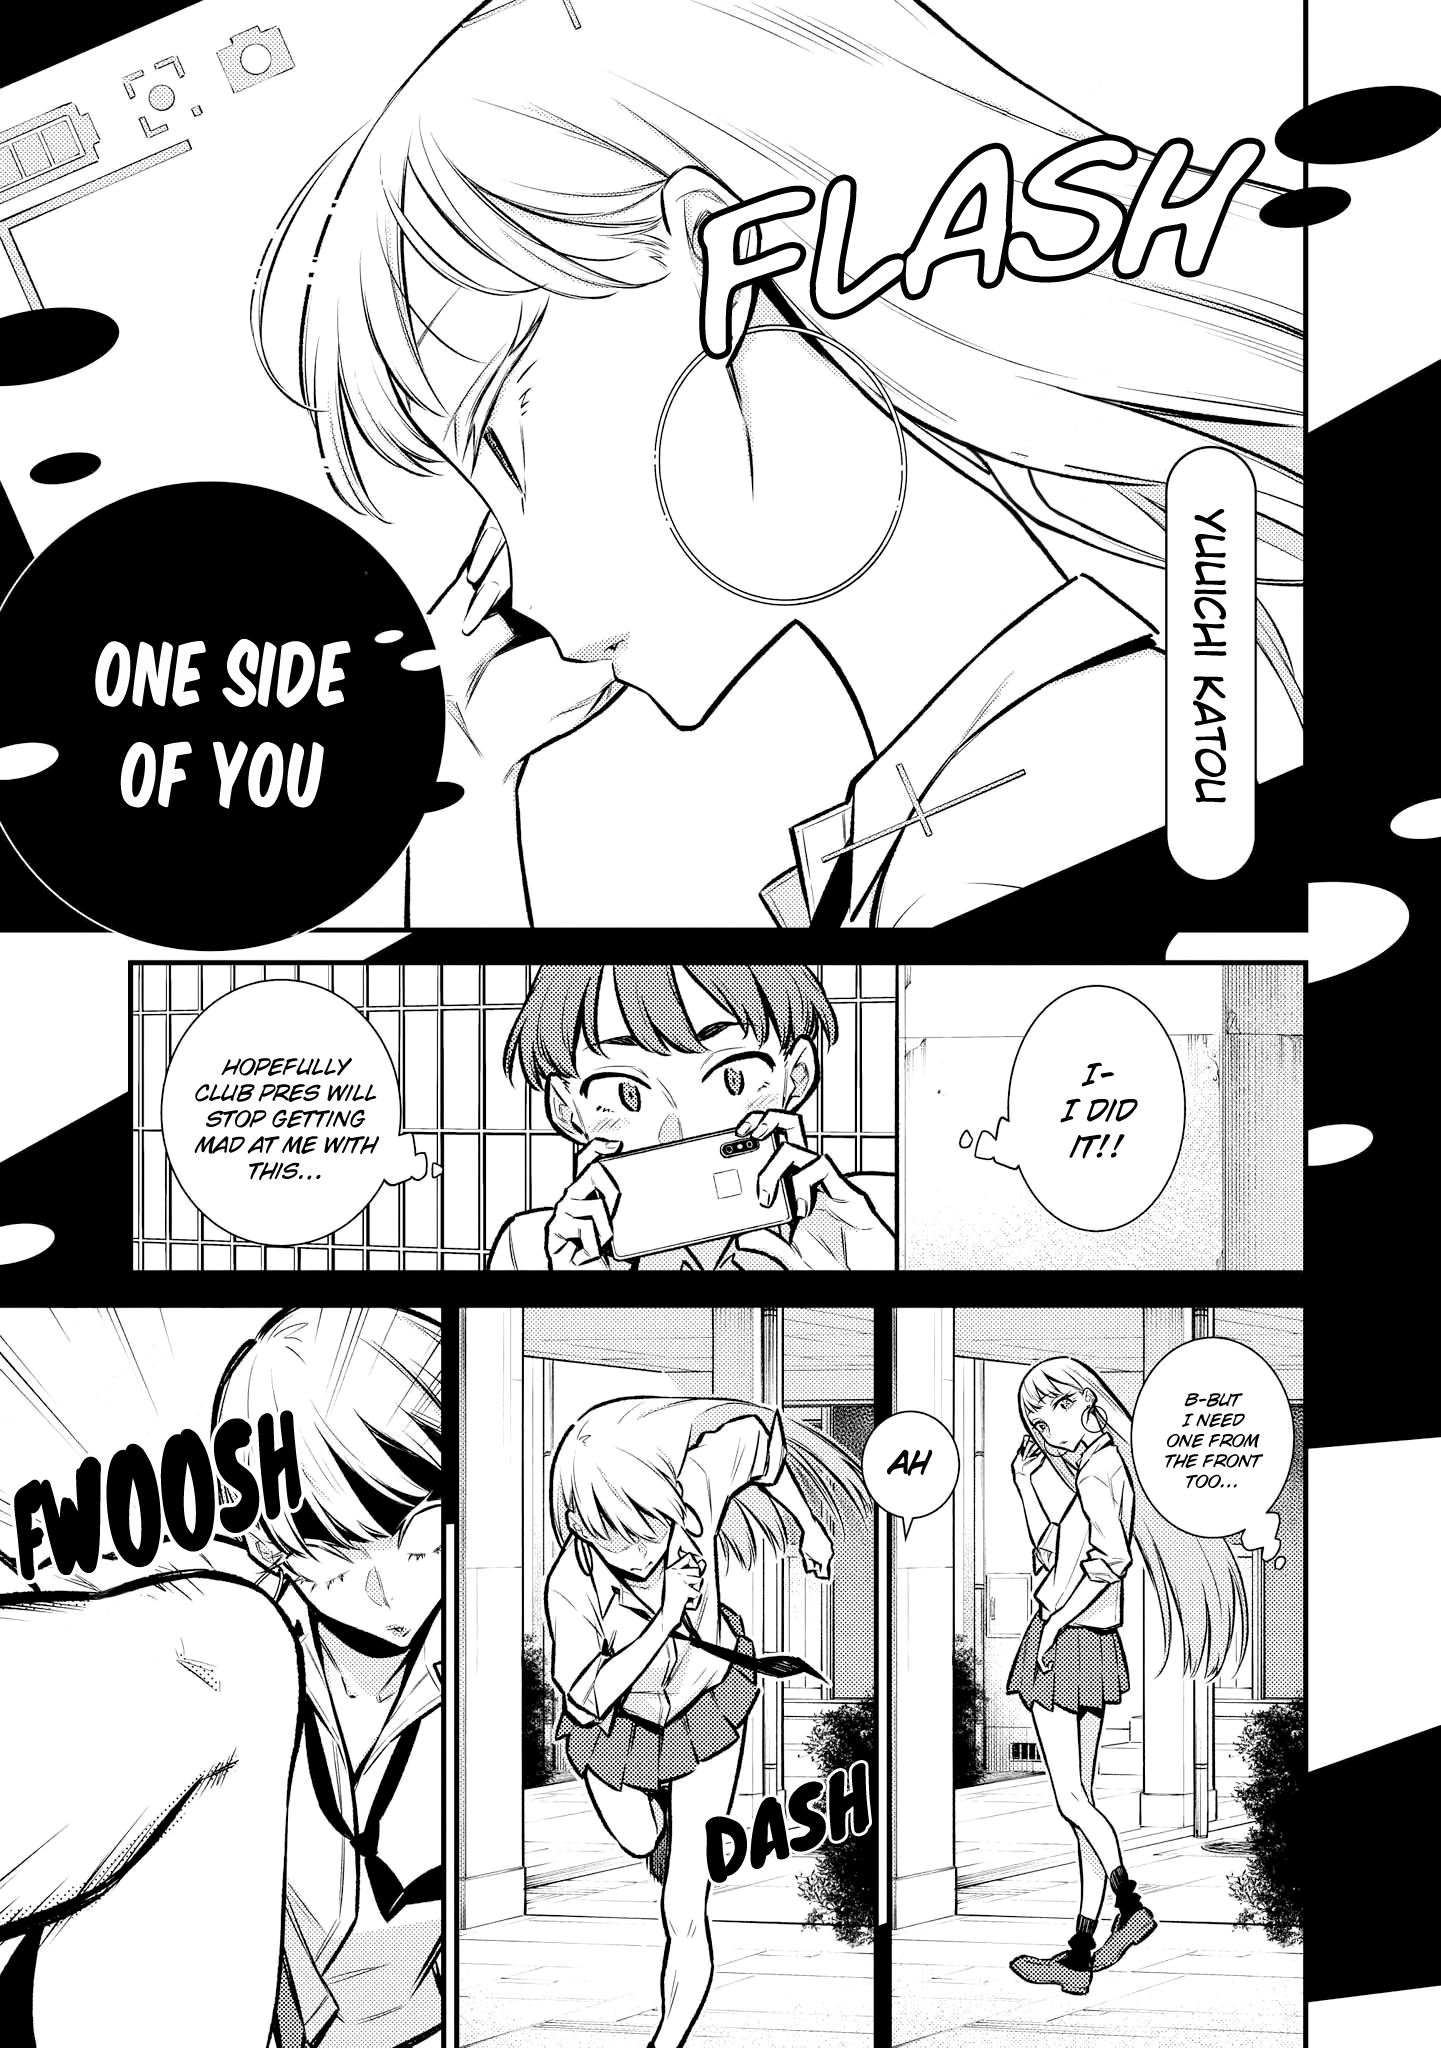 Just Flirting With A Cute, Annoying Kouhai - Page 1